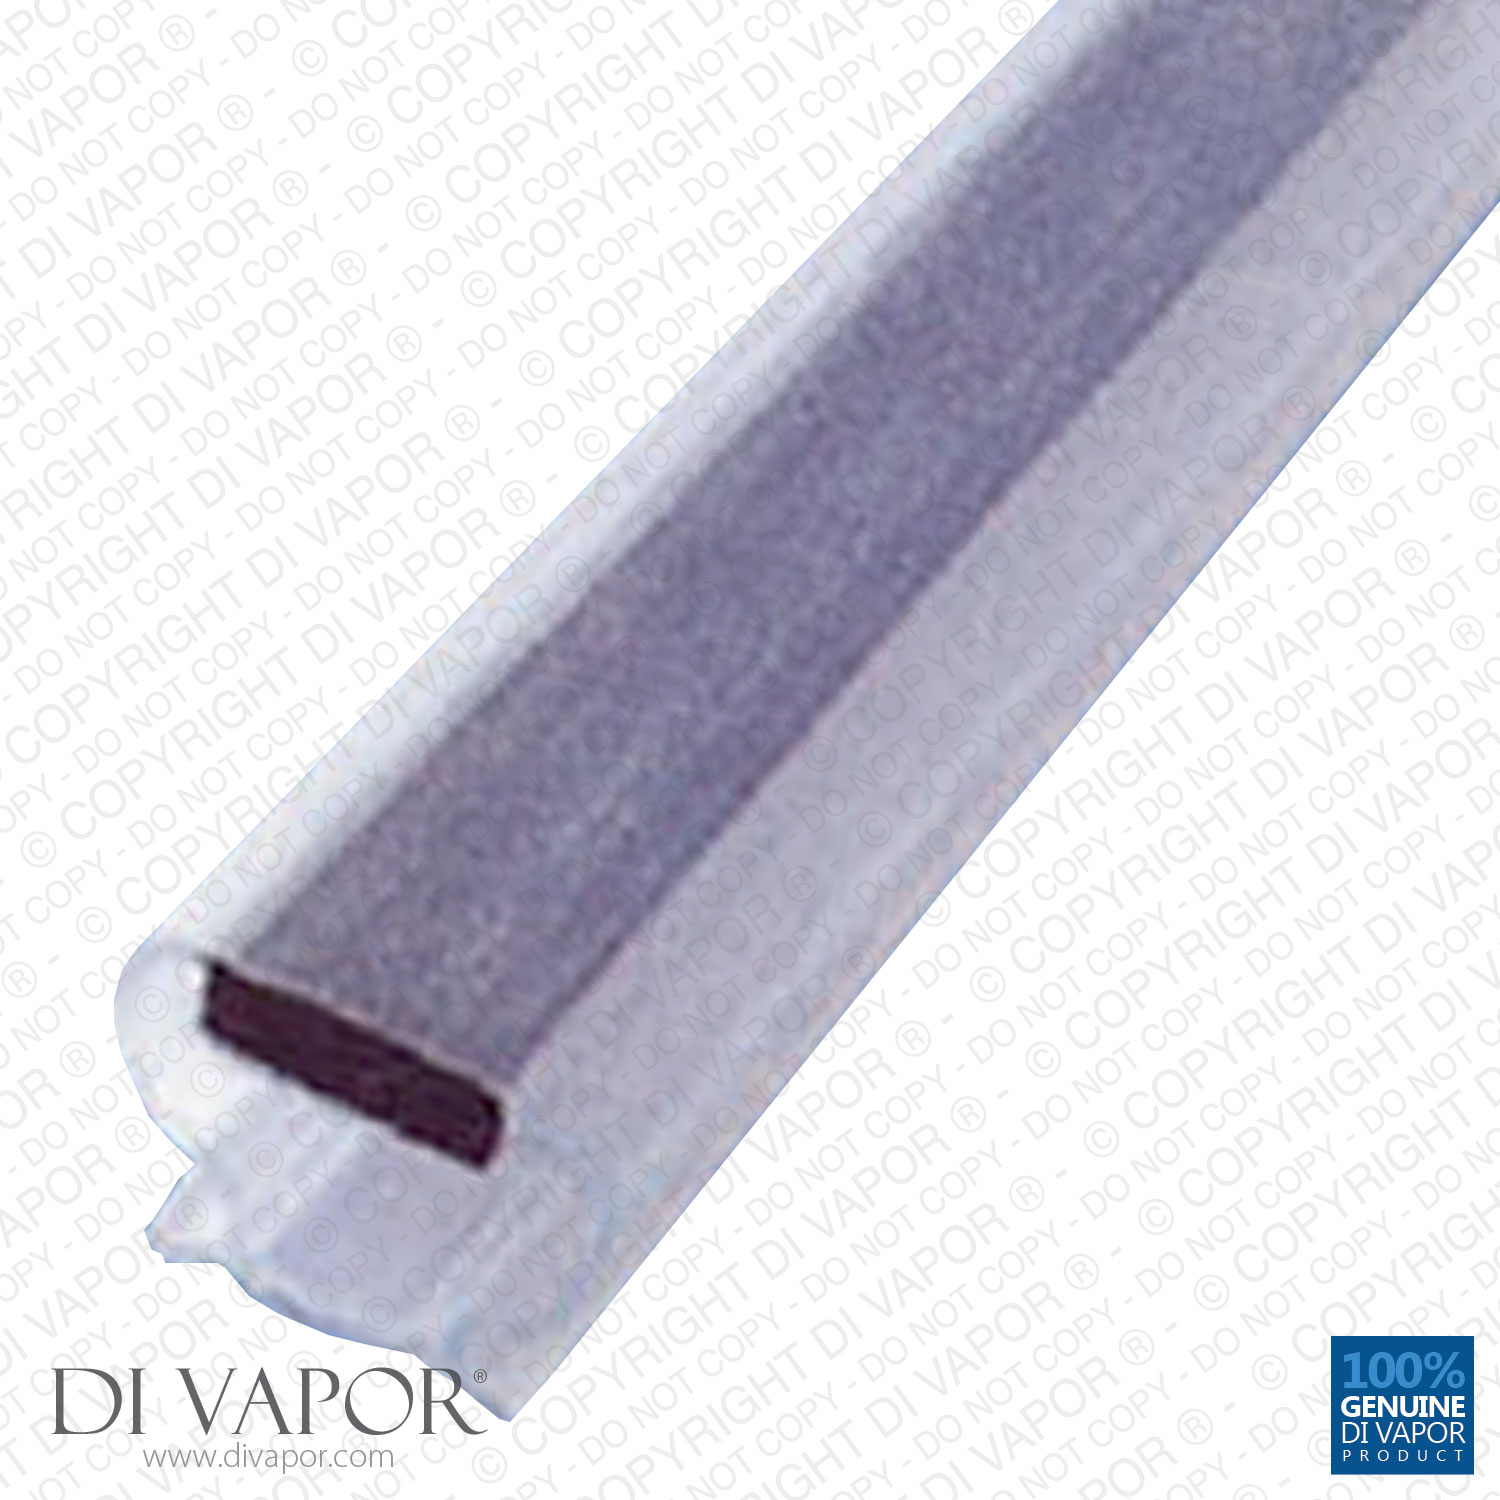 Replacement Magnetic Channel Seal For Shower Door 10mm Channel regarding dimensions 1500 X 1500